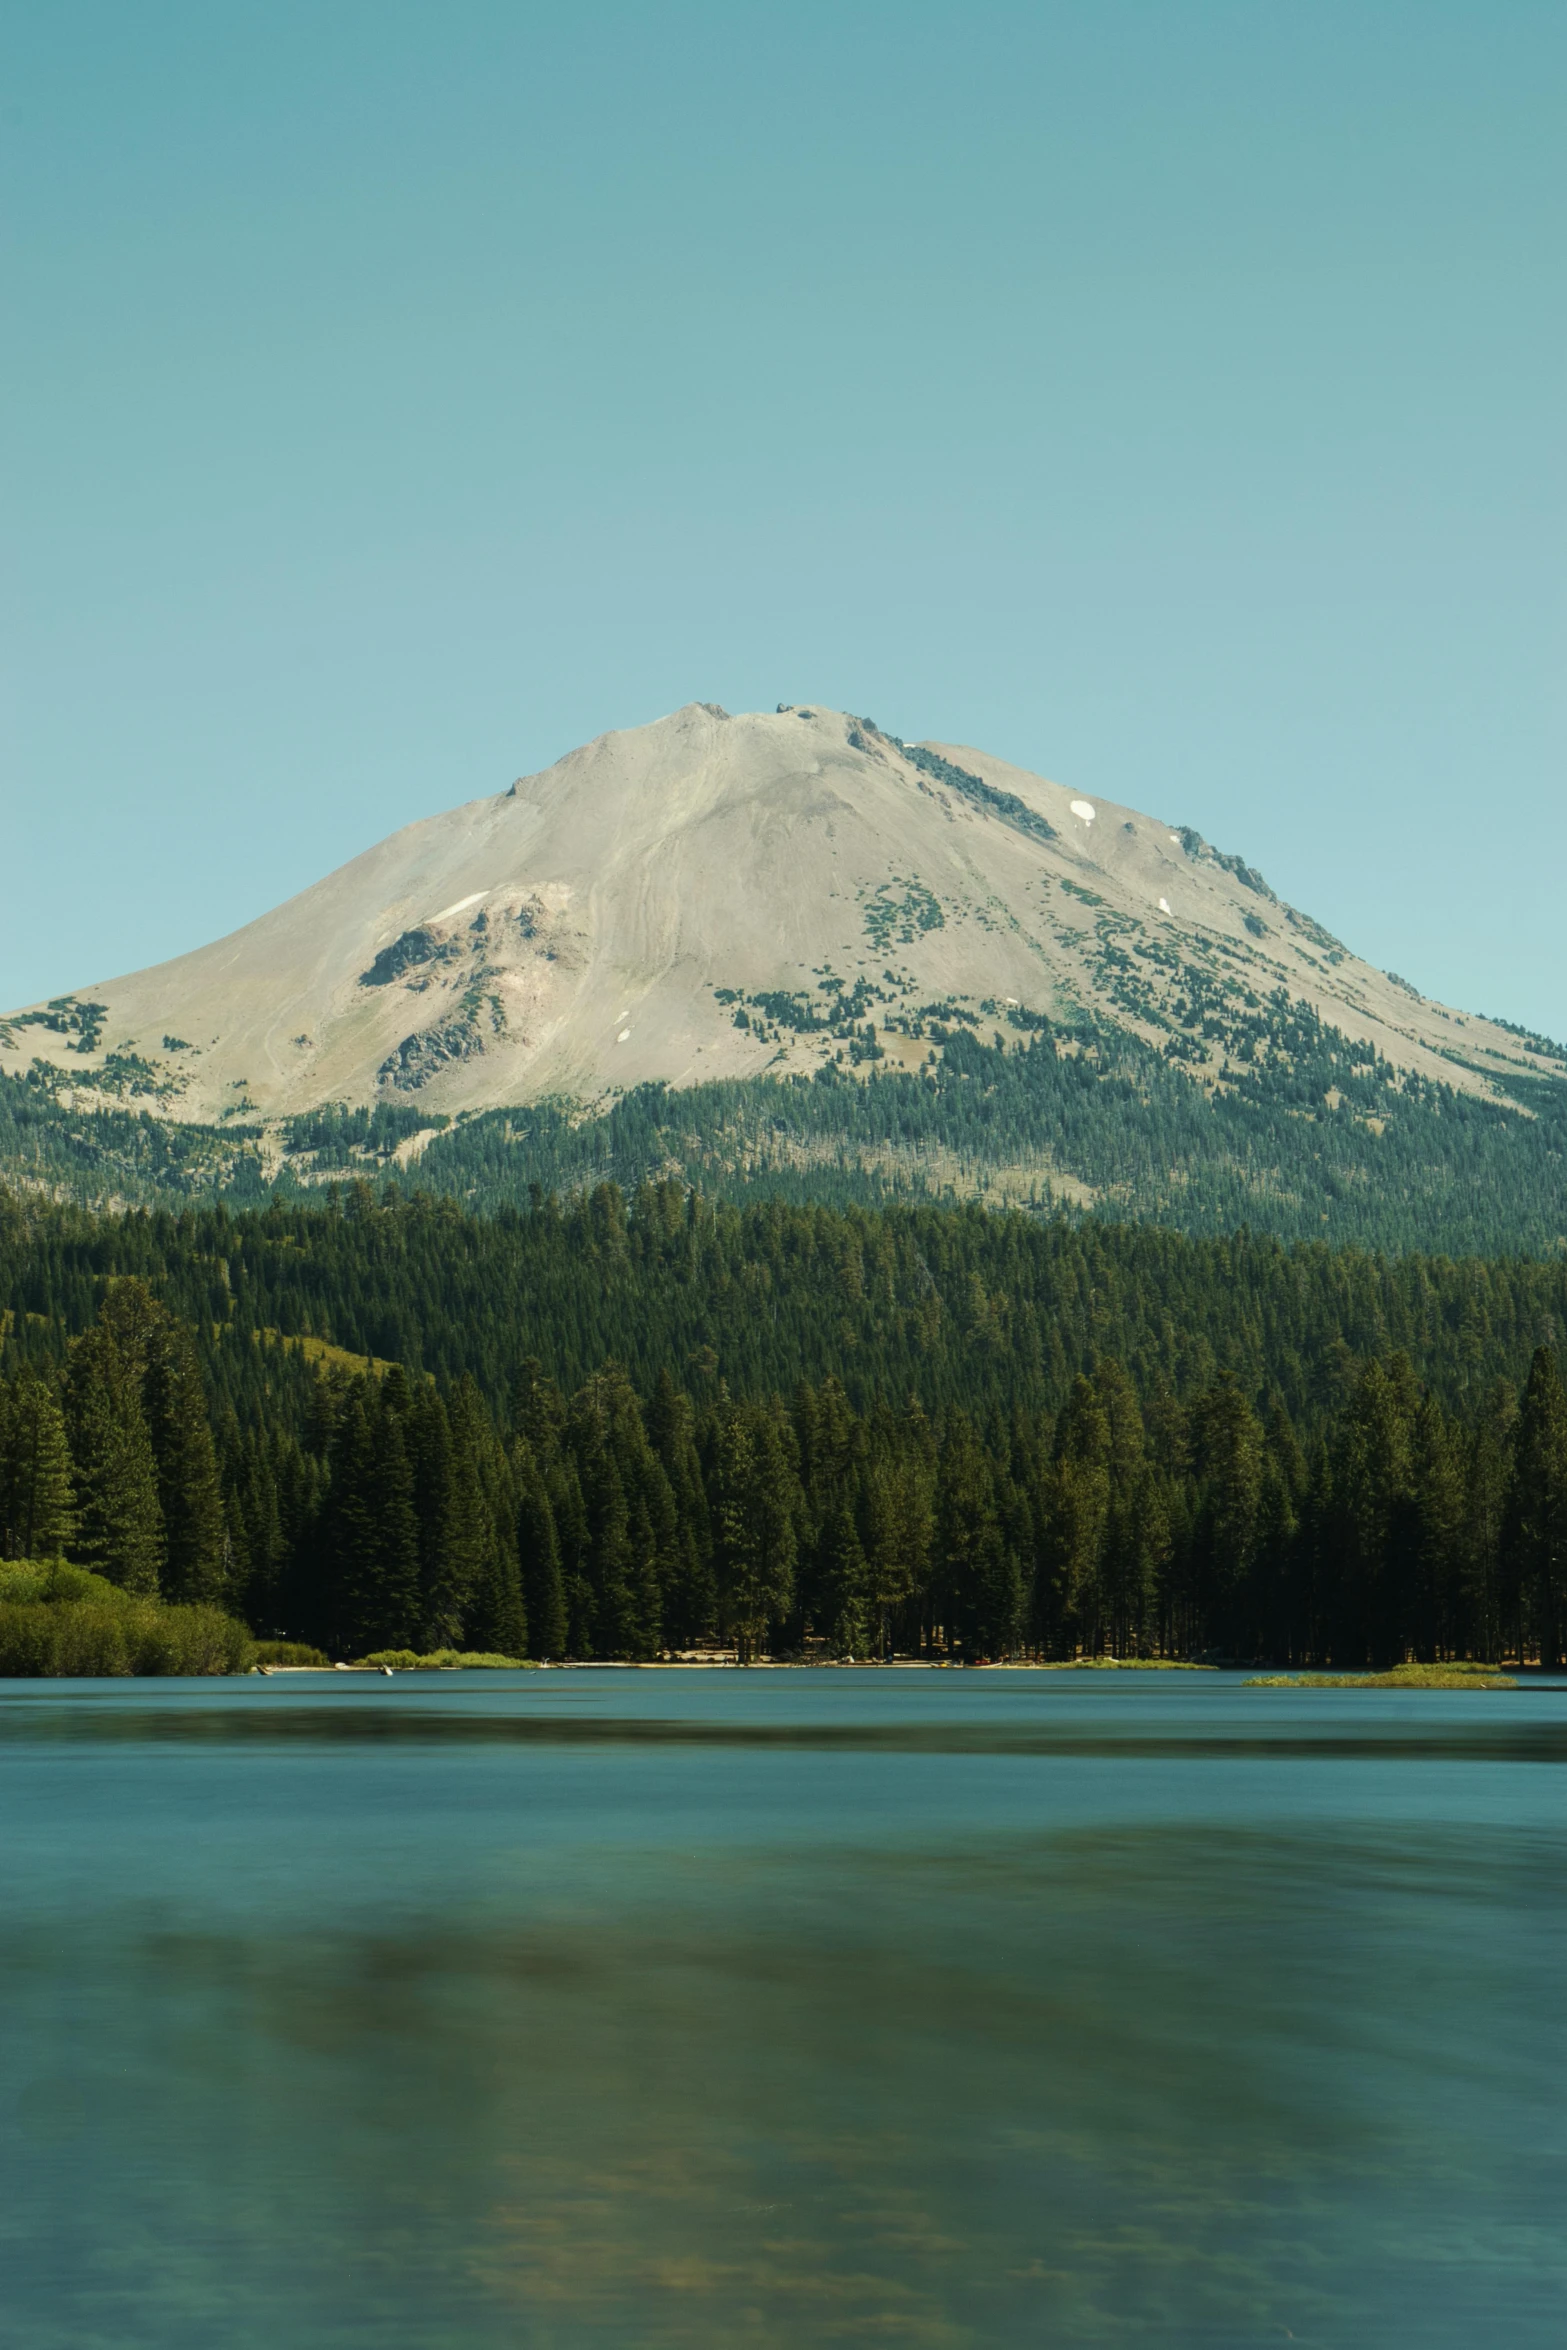 a body of water with a mountain in the background, forest with lake, california, volcano setting, promo image